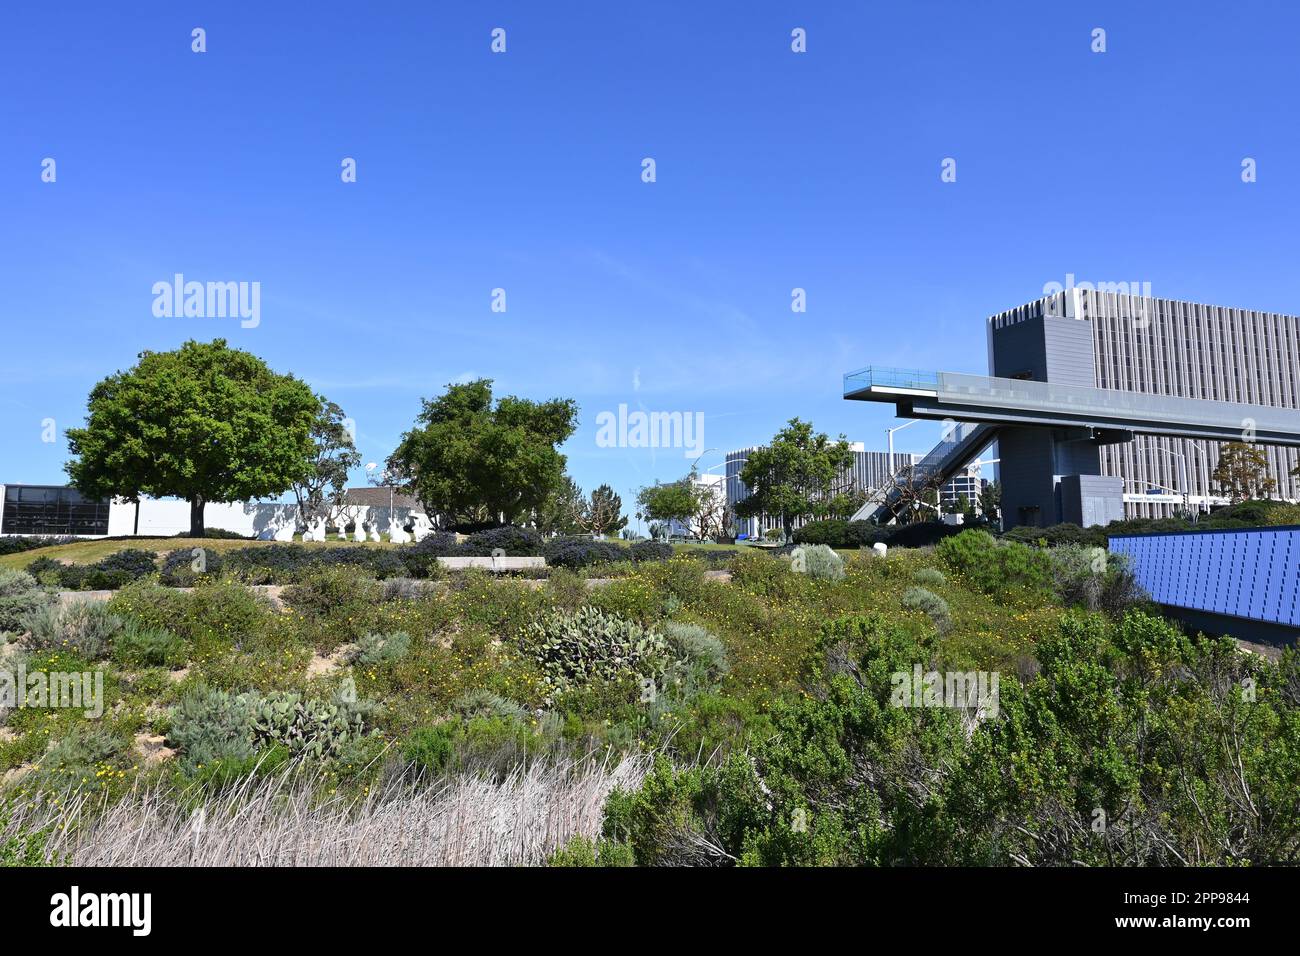 NEWPORT BEACH, CALIFORNIA - 22 APR 2023: Pedestrian bridge ove San Miguel Drive at Avocado Ave connecting the two halves of Civic Center Park with off Stock Photo